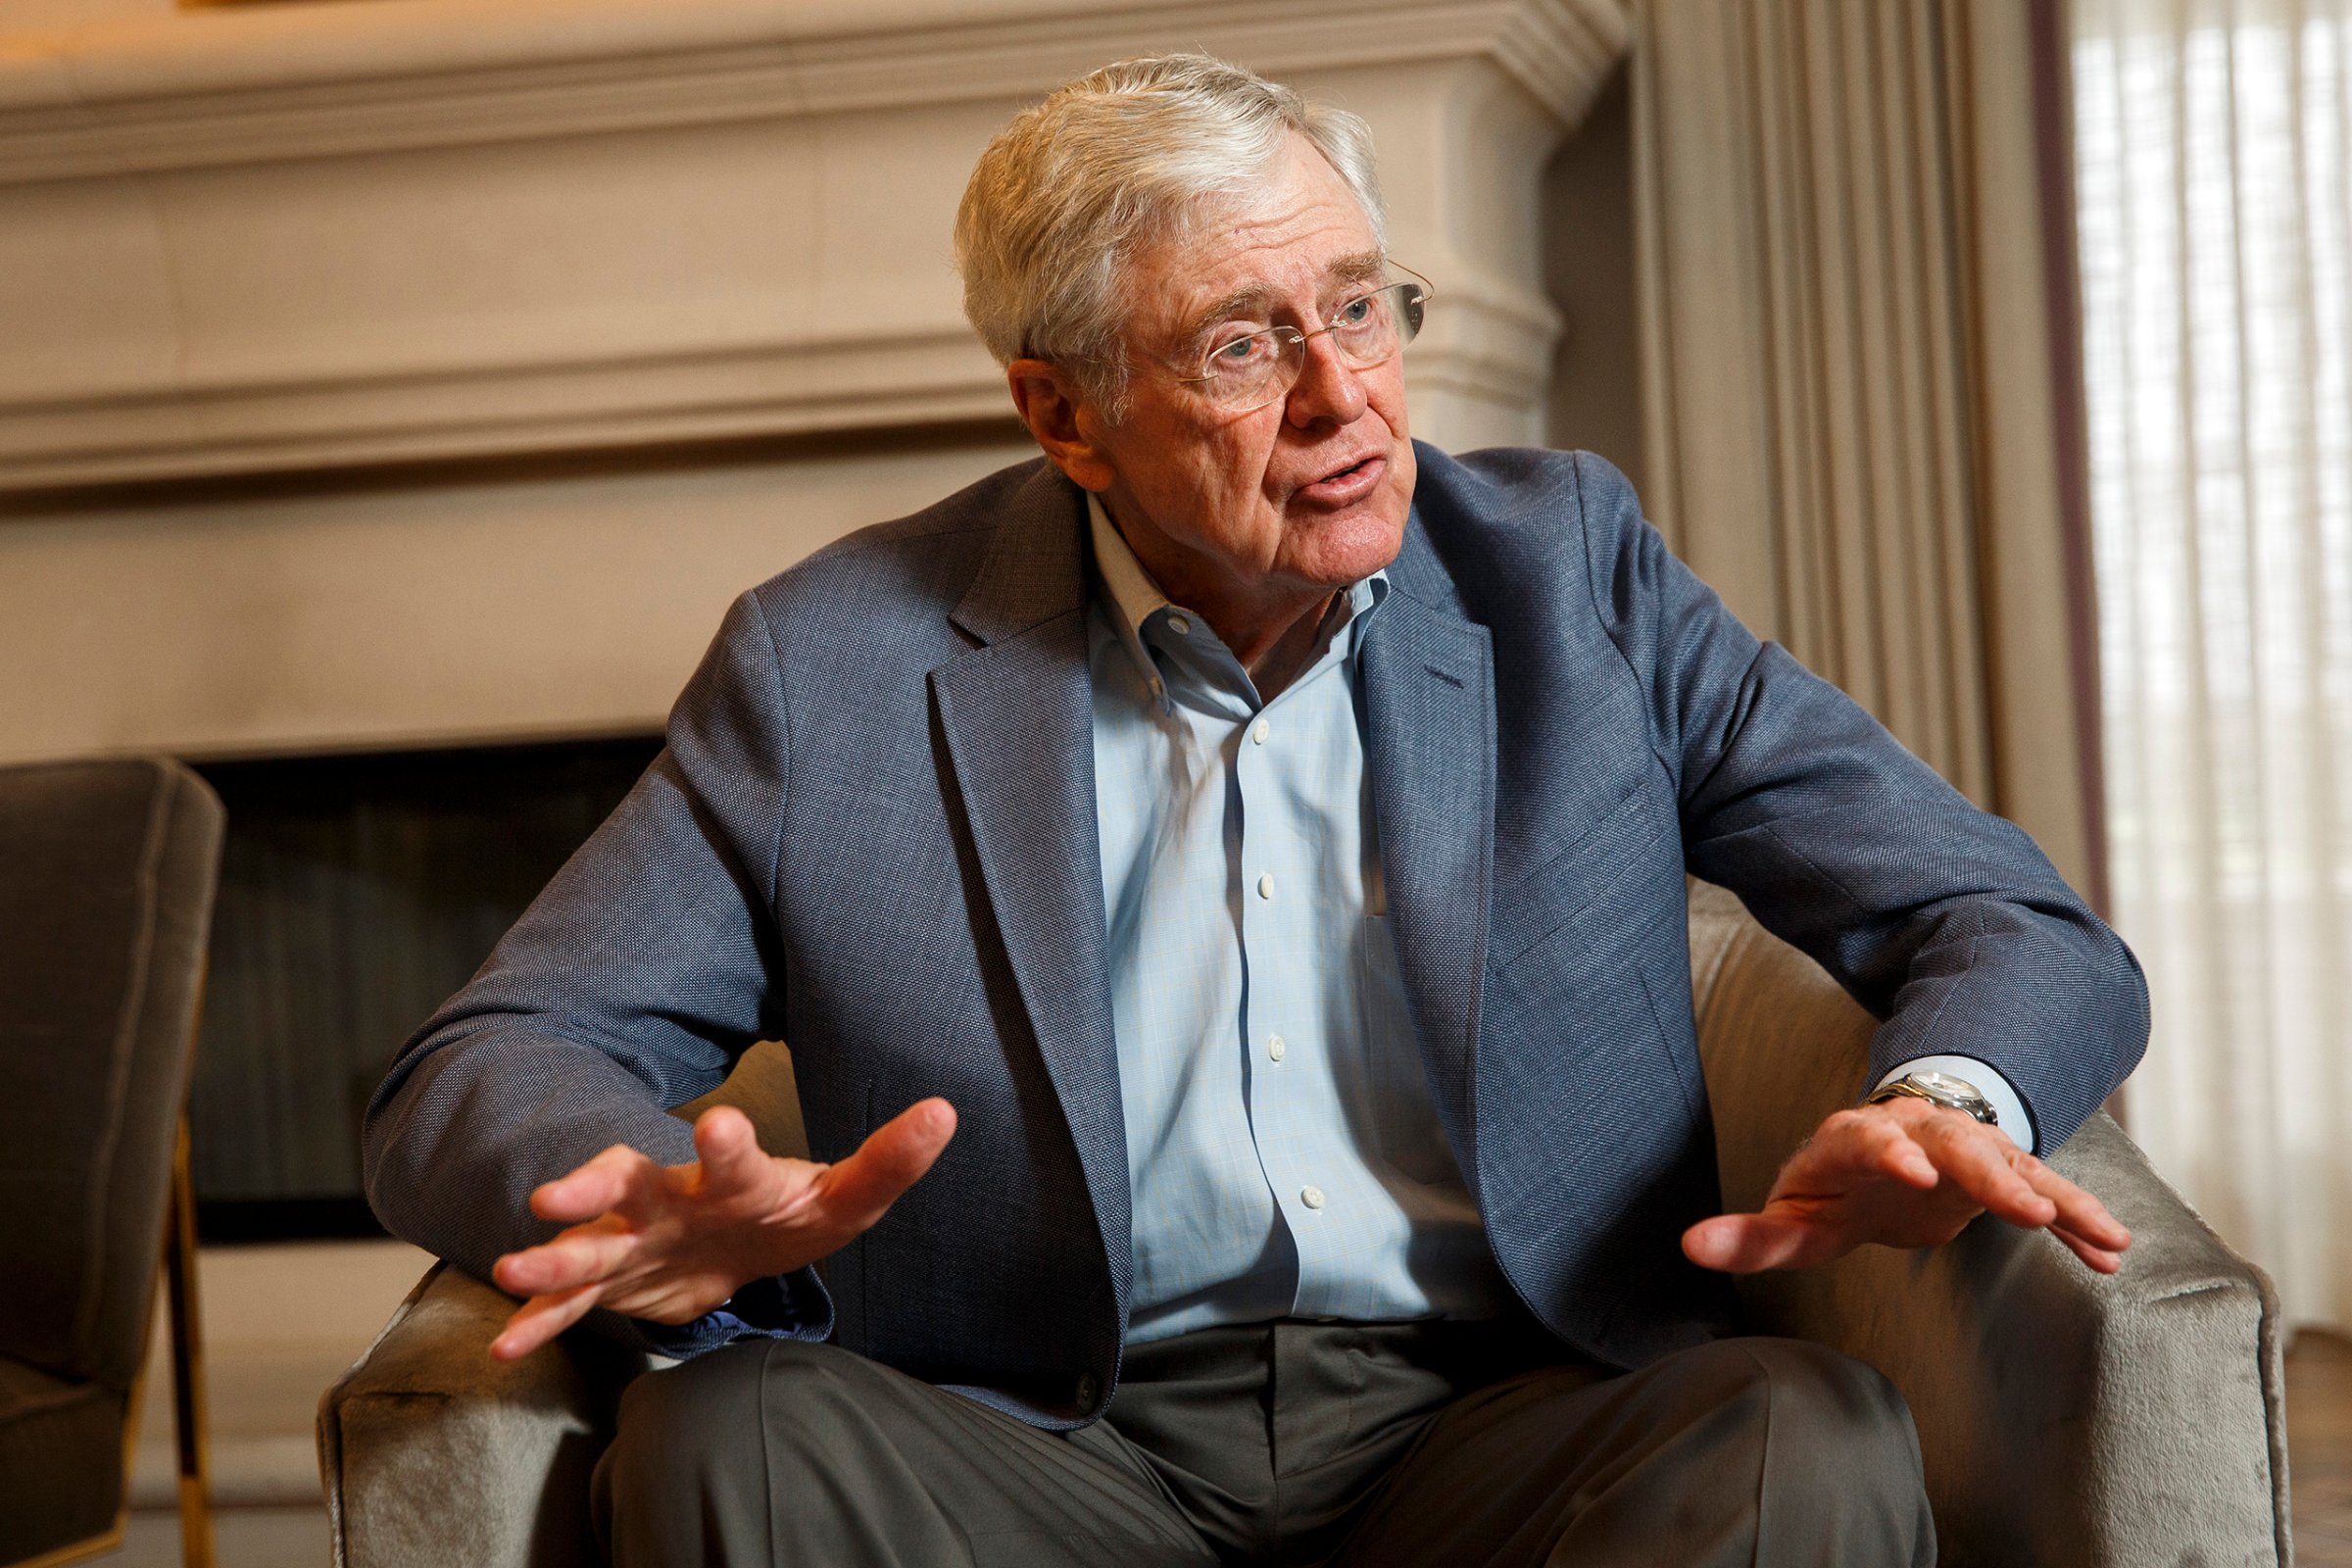 Charles Koch speaks during an interview with the Washington Post at the Freedom Partners Summit in Dana Point, Calif., on Aug. 3, 2015.